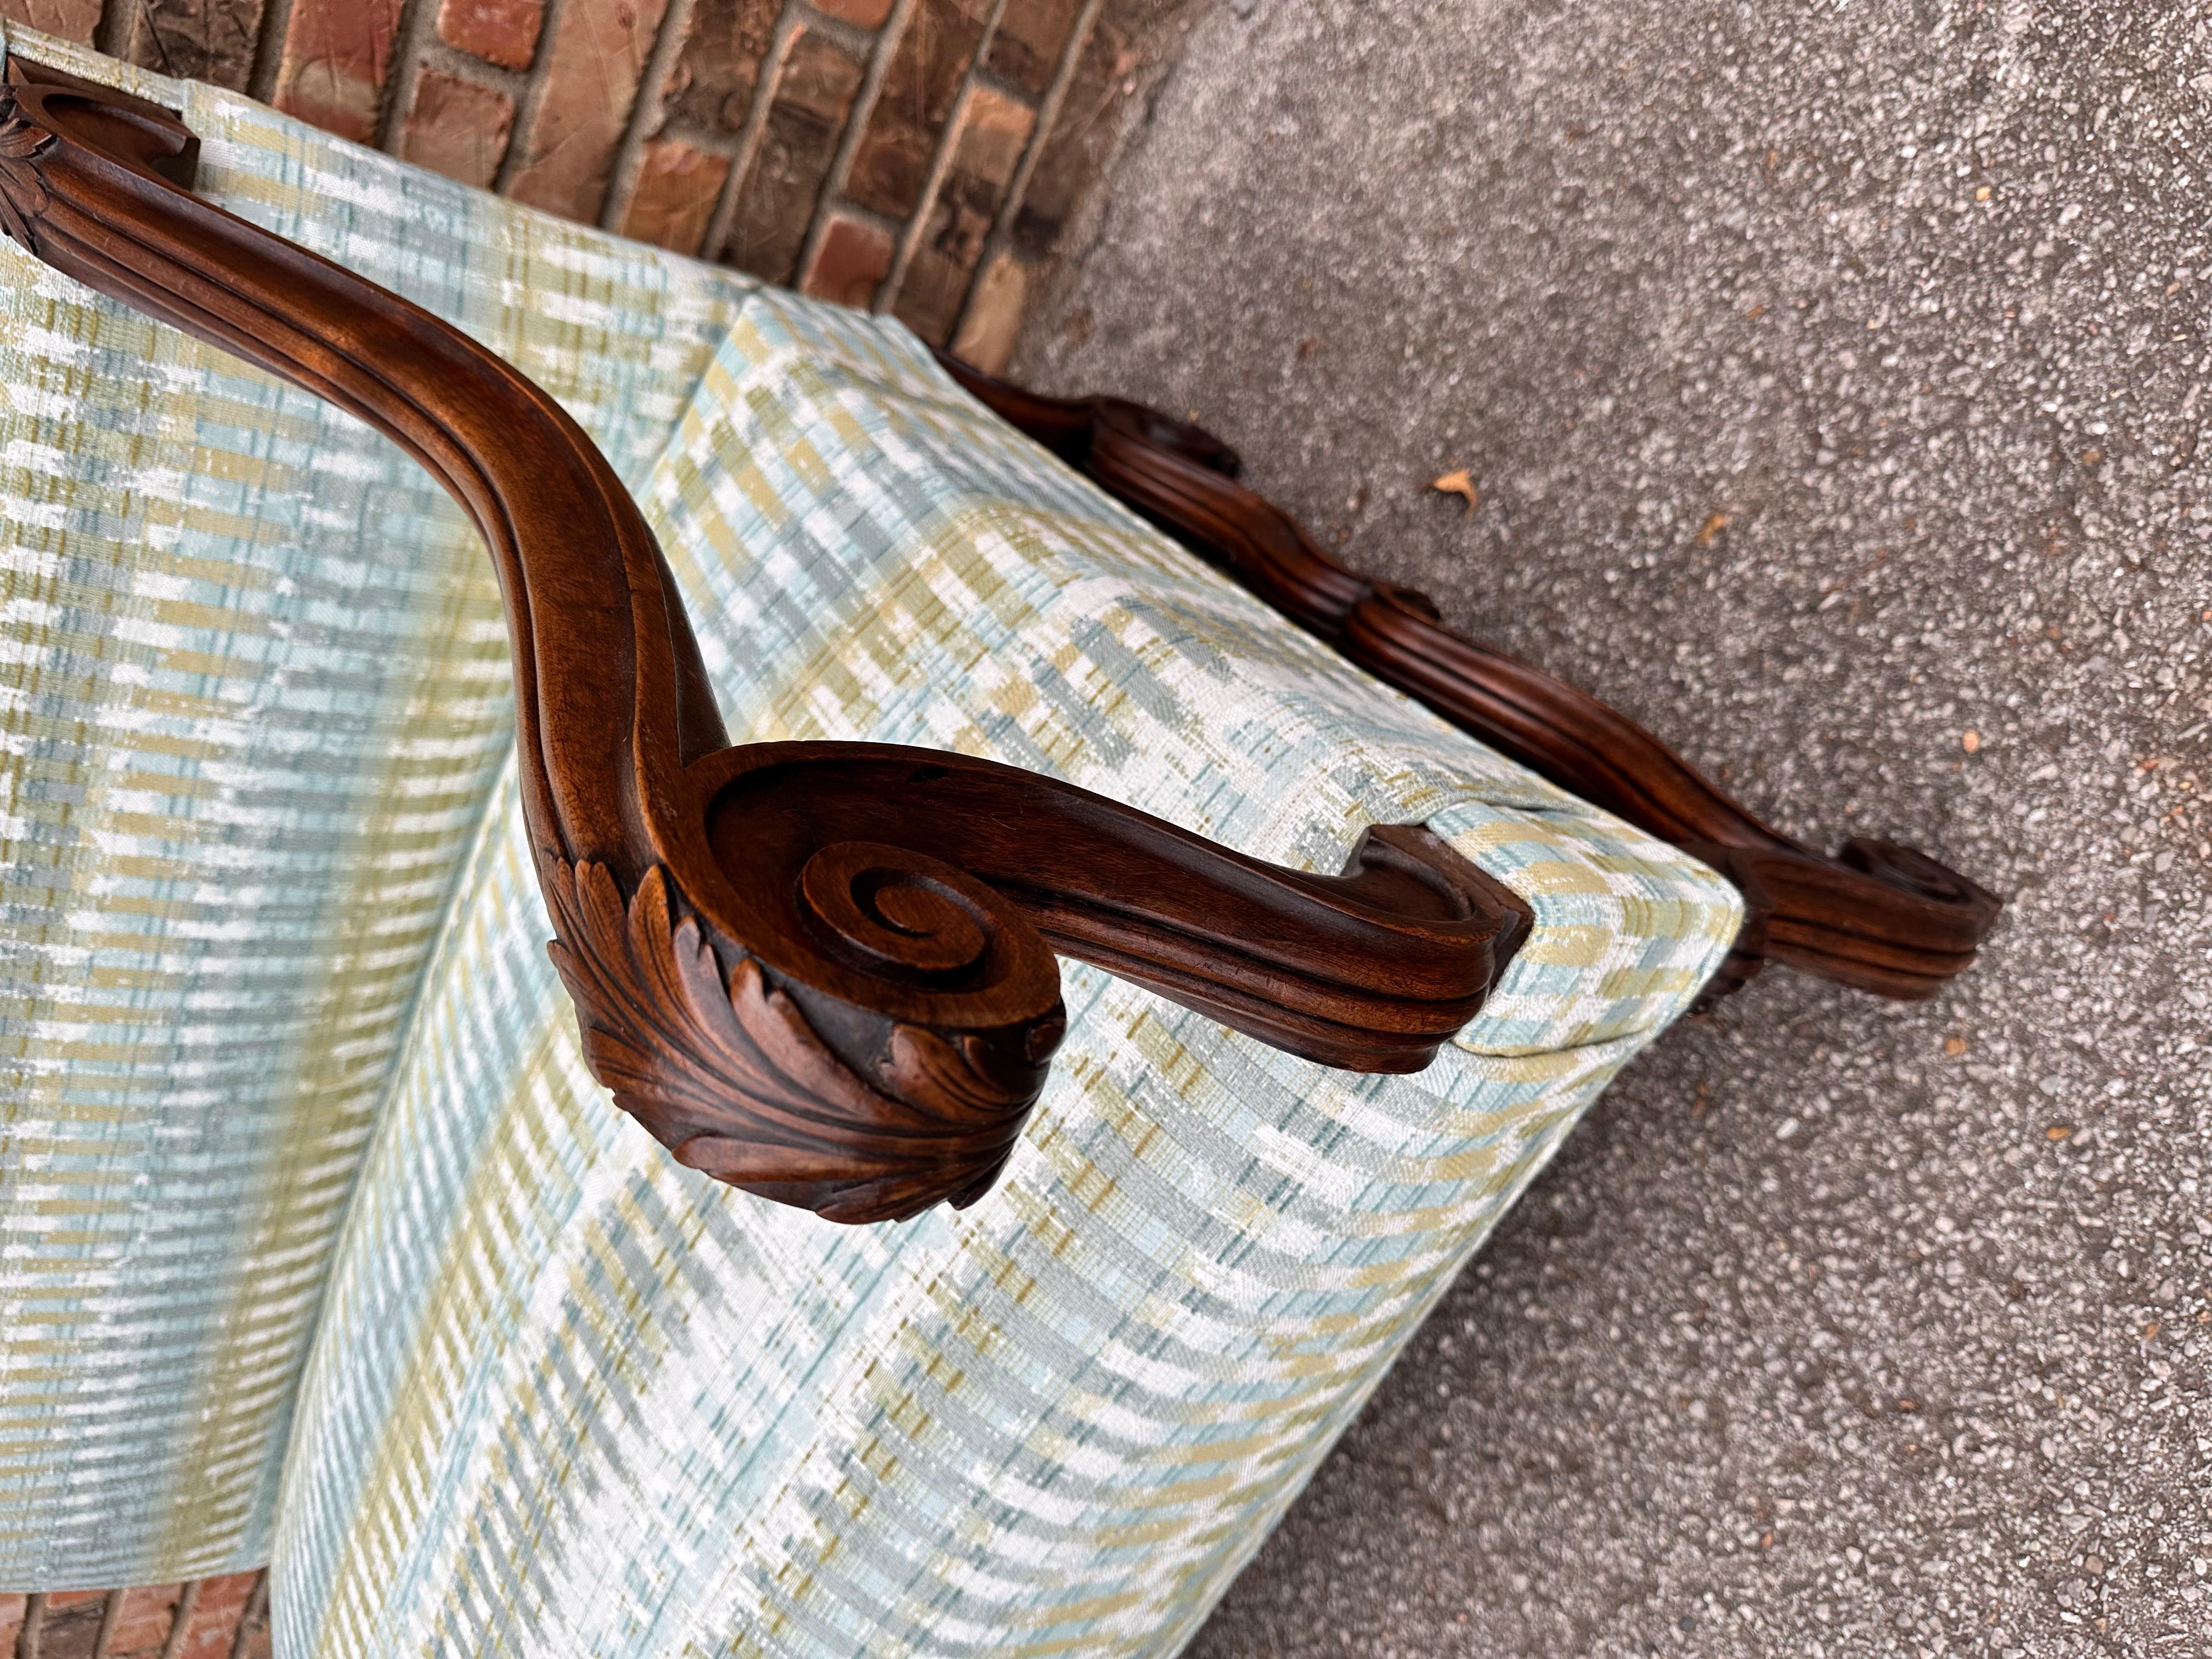 This is an original French antique bench frame that has been newly reupholstered. The new fabric mixes bright yet unobtrusive blue, green, and white tones in a plaid/tweed pattern. The colors pair well with the dark wood of the bench, and the hand